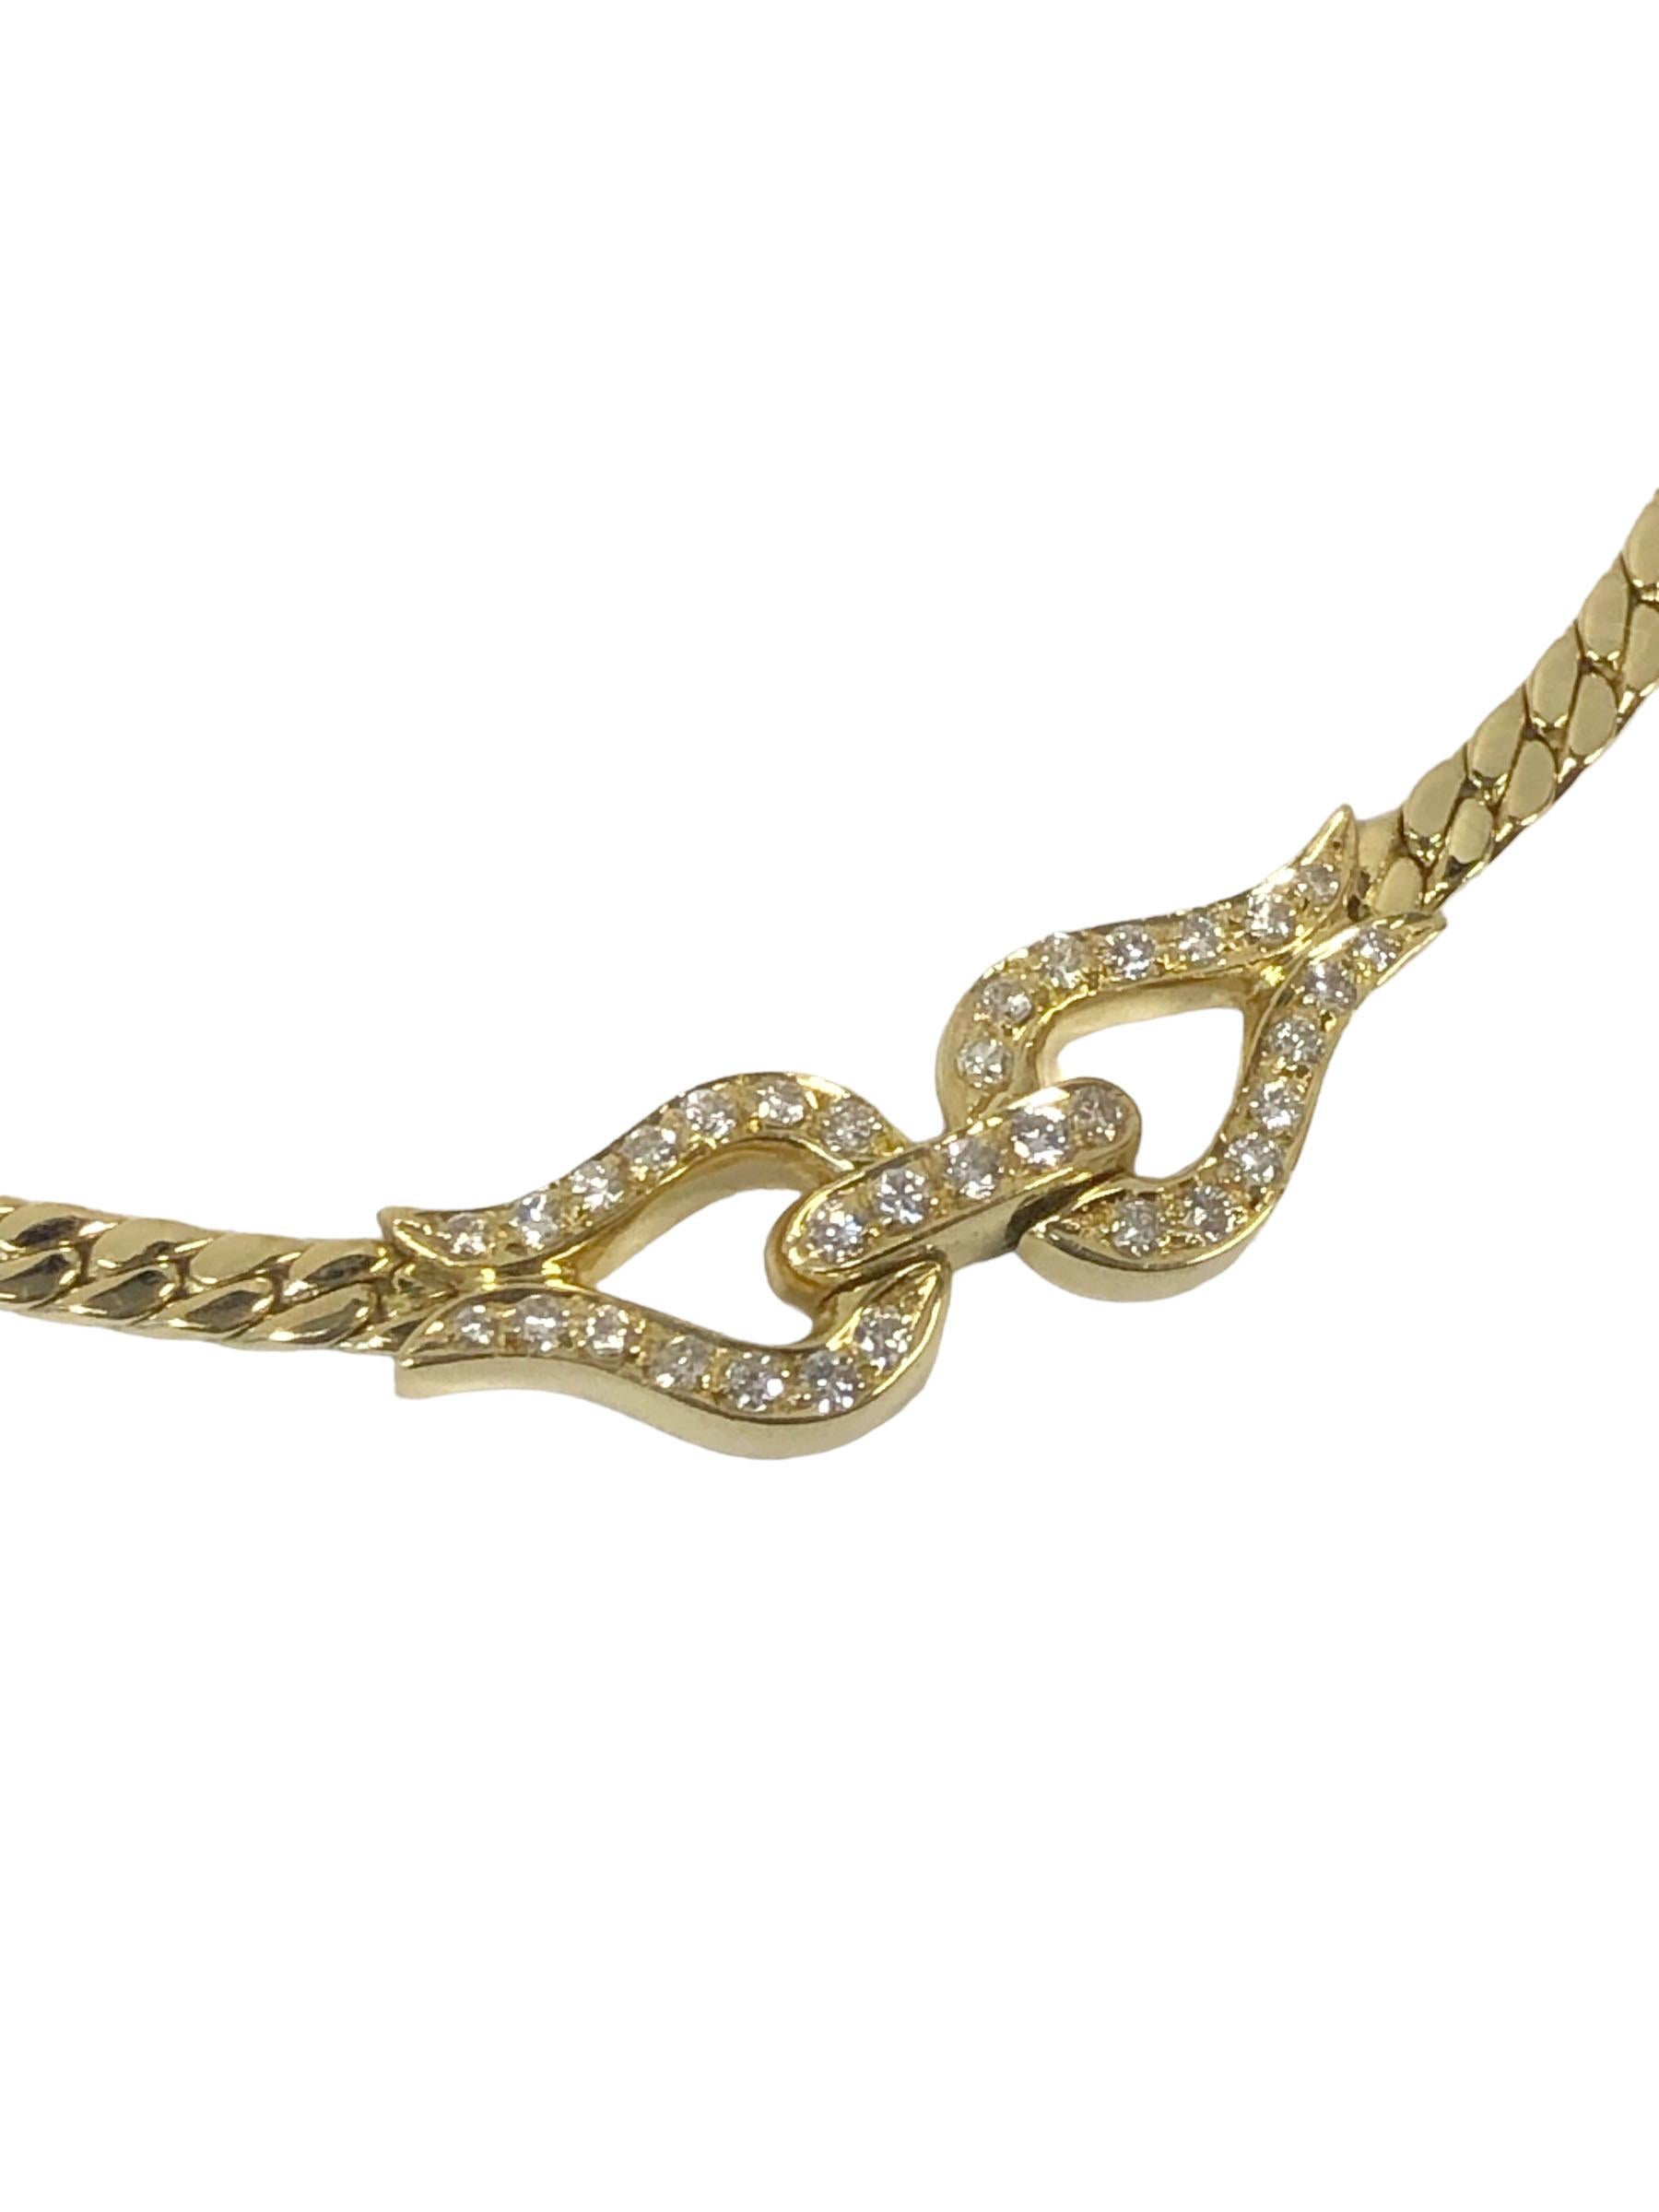 Circa 1990 Cartier 18k Yellow Gold Necklace, 3 M.M. wide Curb link chain with a central section set with 33 Round Brilliant cut Diamonds totaling .30 Carat. 14 inches in length and can be made longer if desired. Tongue lock with safety clasp.